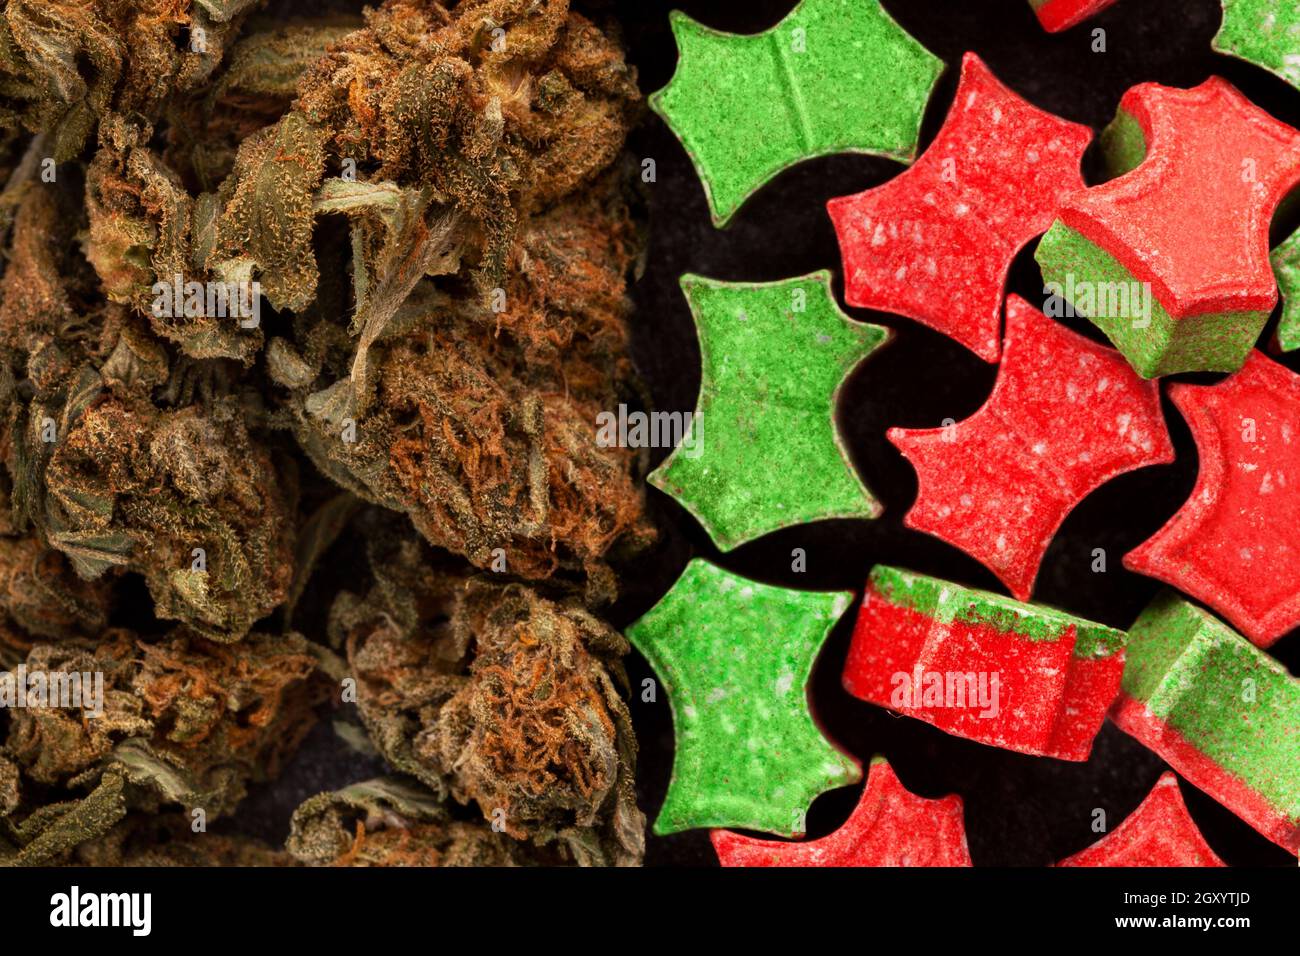 Marijuana and Ecstasy close up. Colorful pills and cannabis buds. Stock Photo